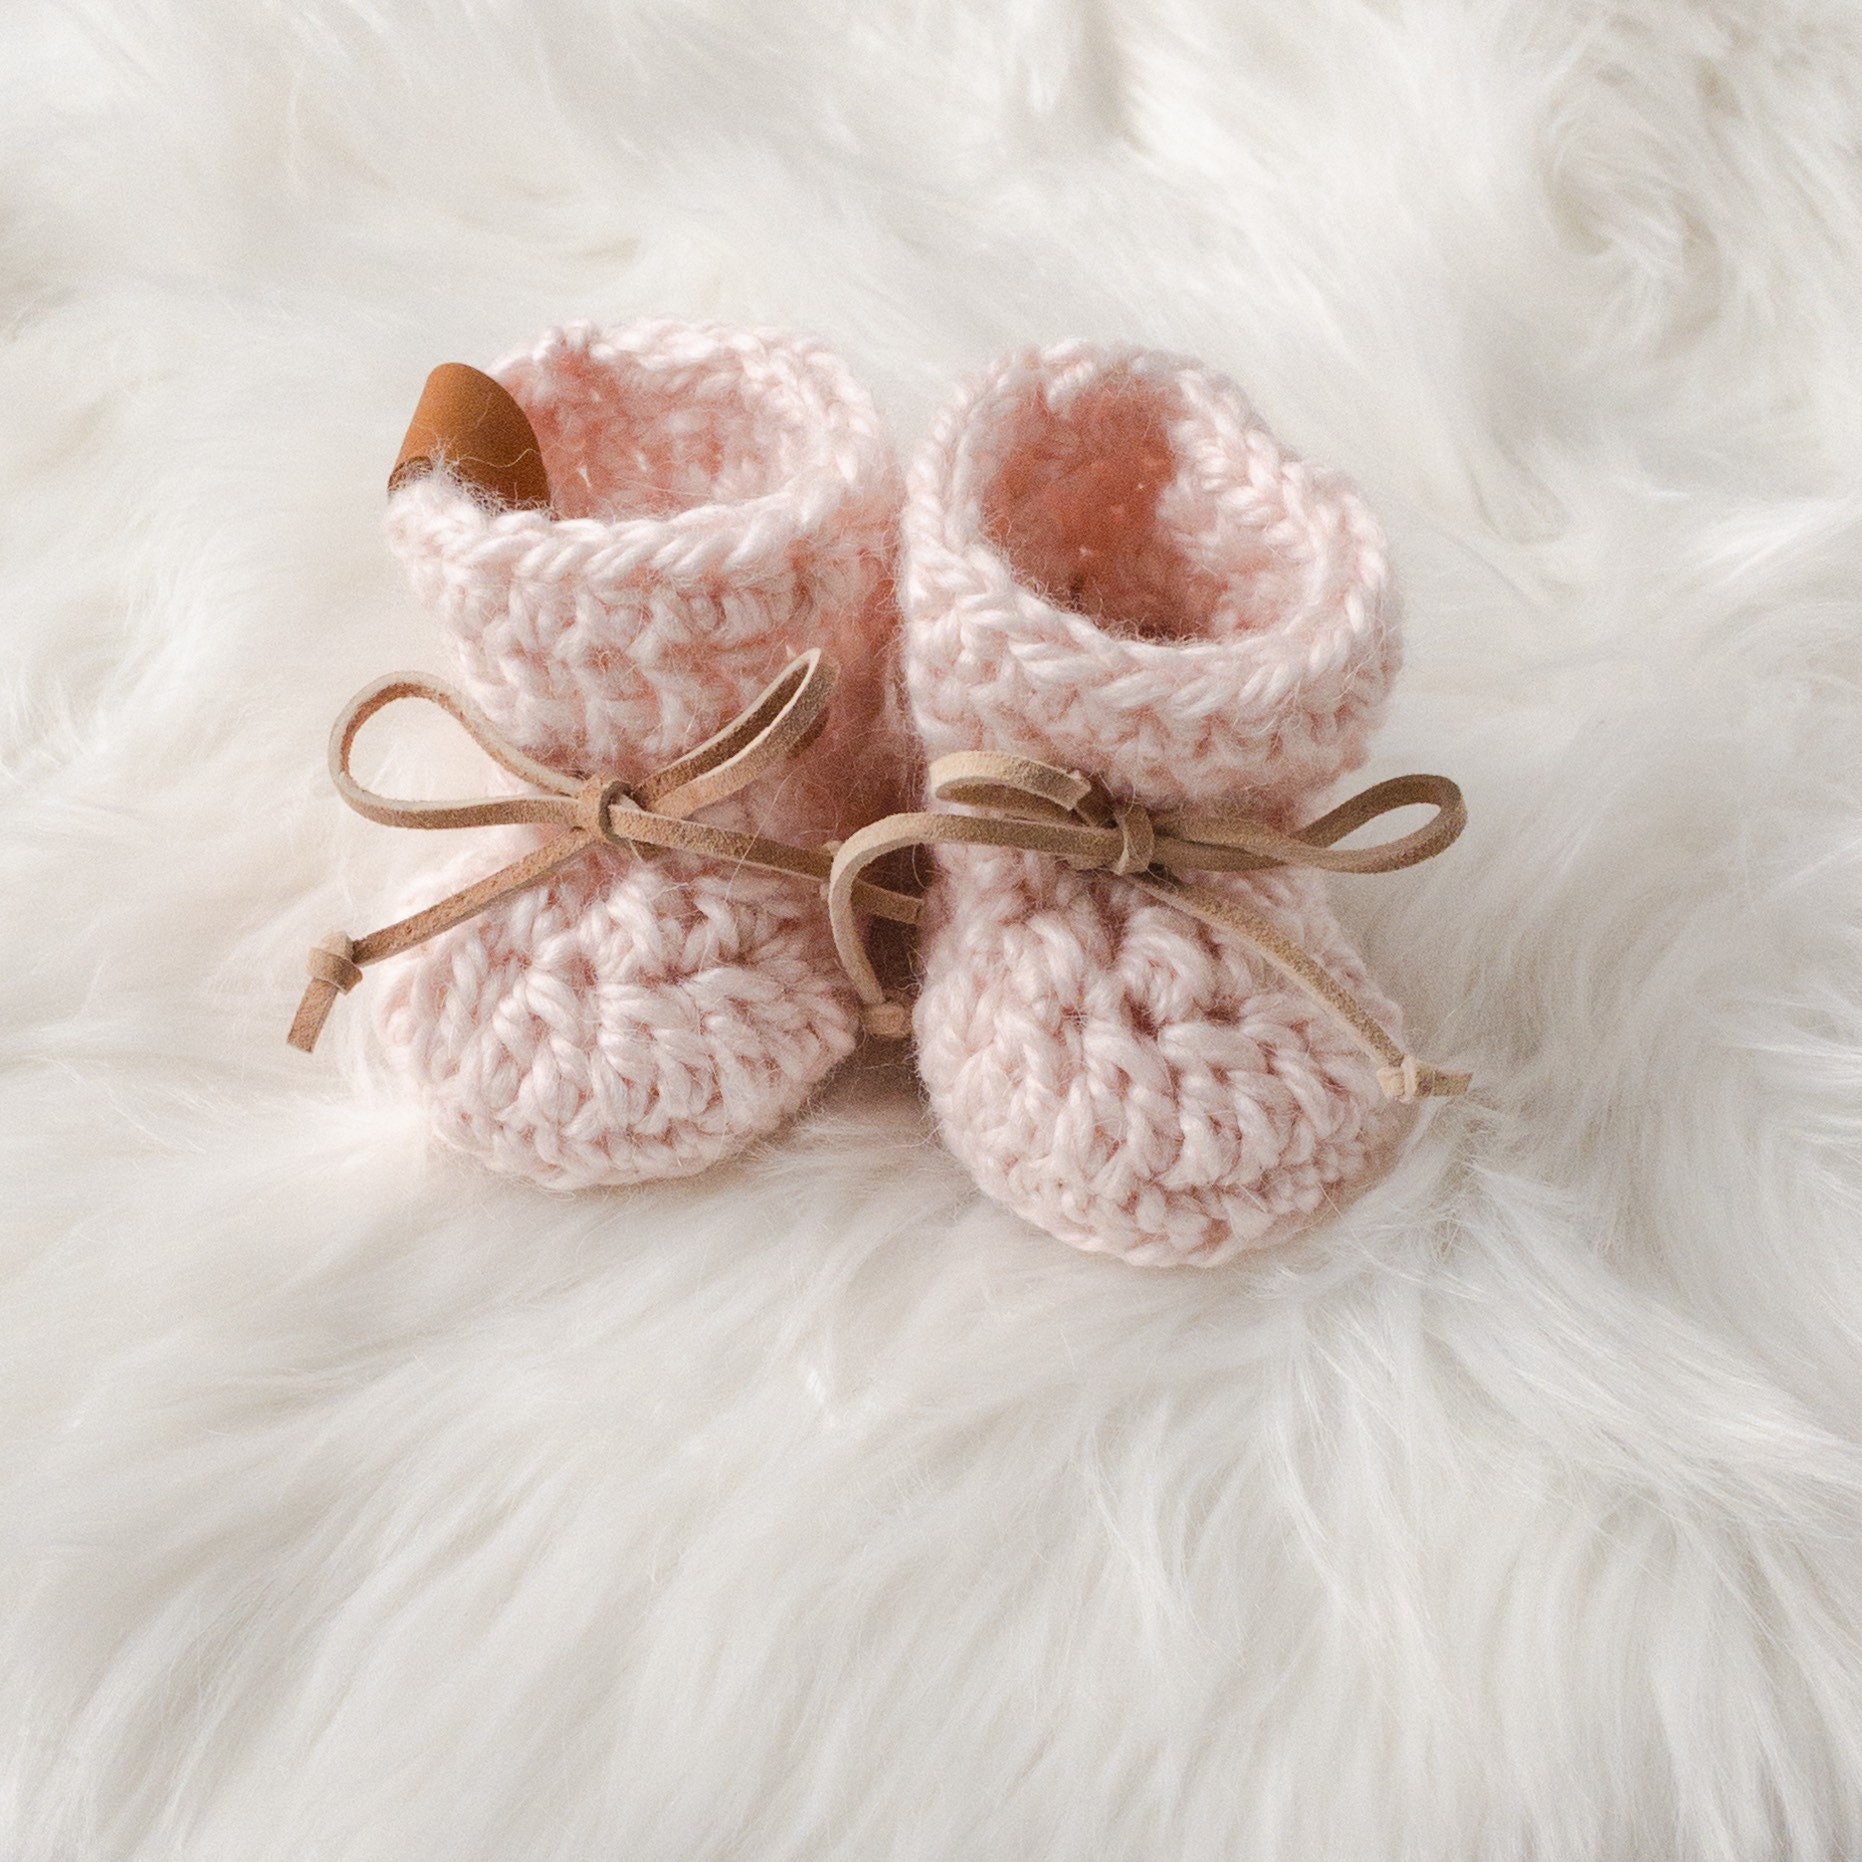 Baby Booties Baby Slippers Baby Shower Gift Crochet Baby | Etsy Canada